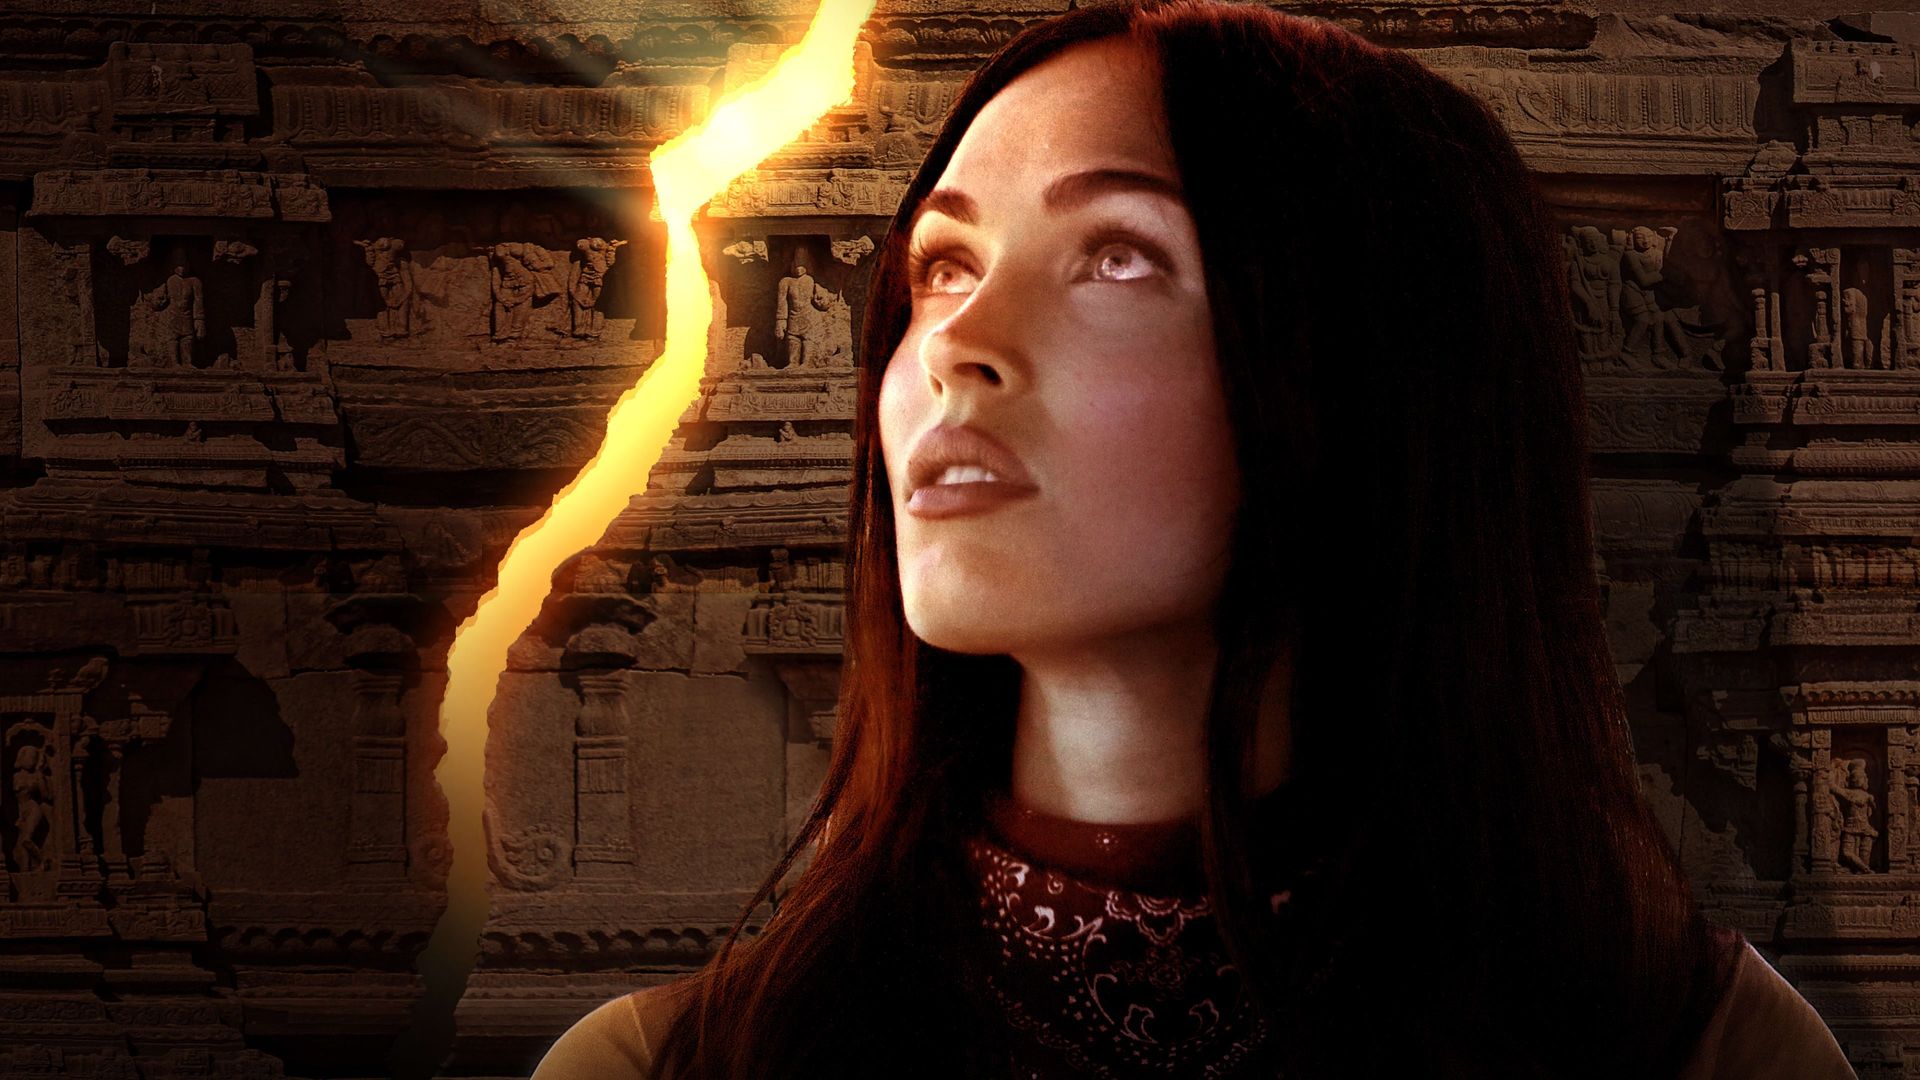 Legends of the Lost with Megan Fox background